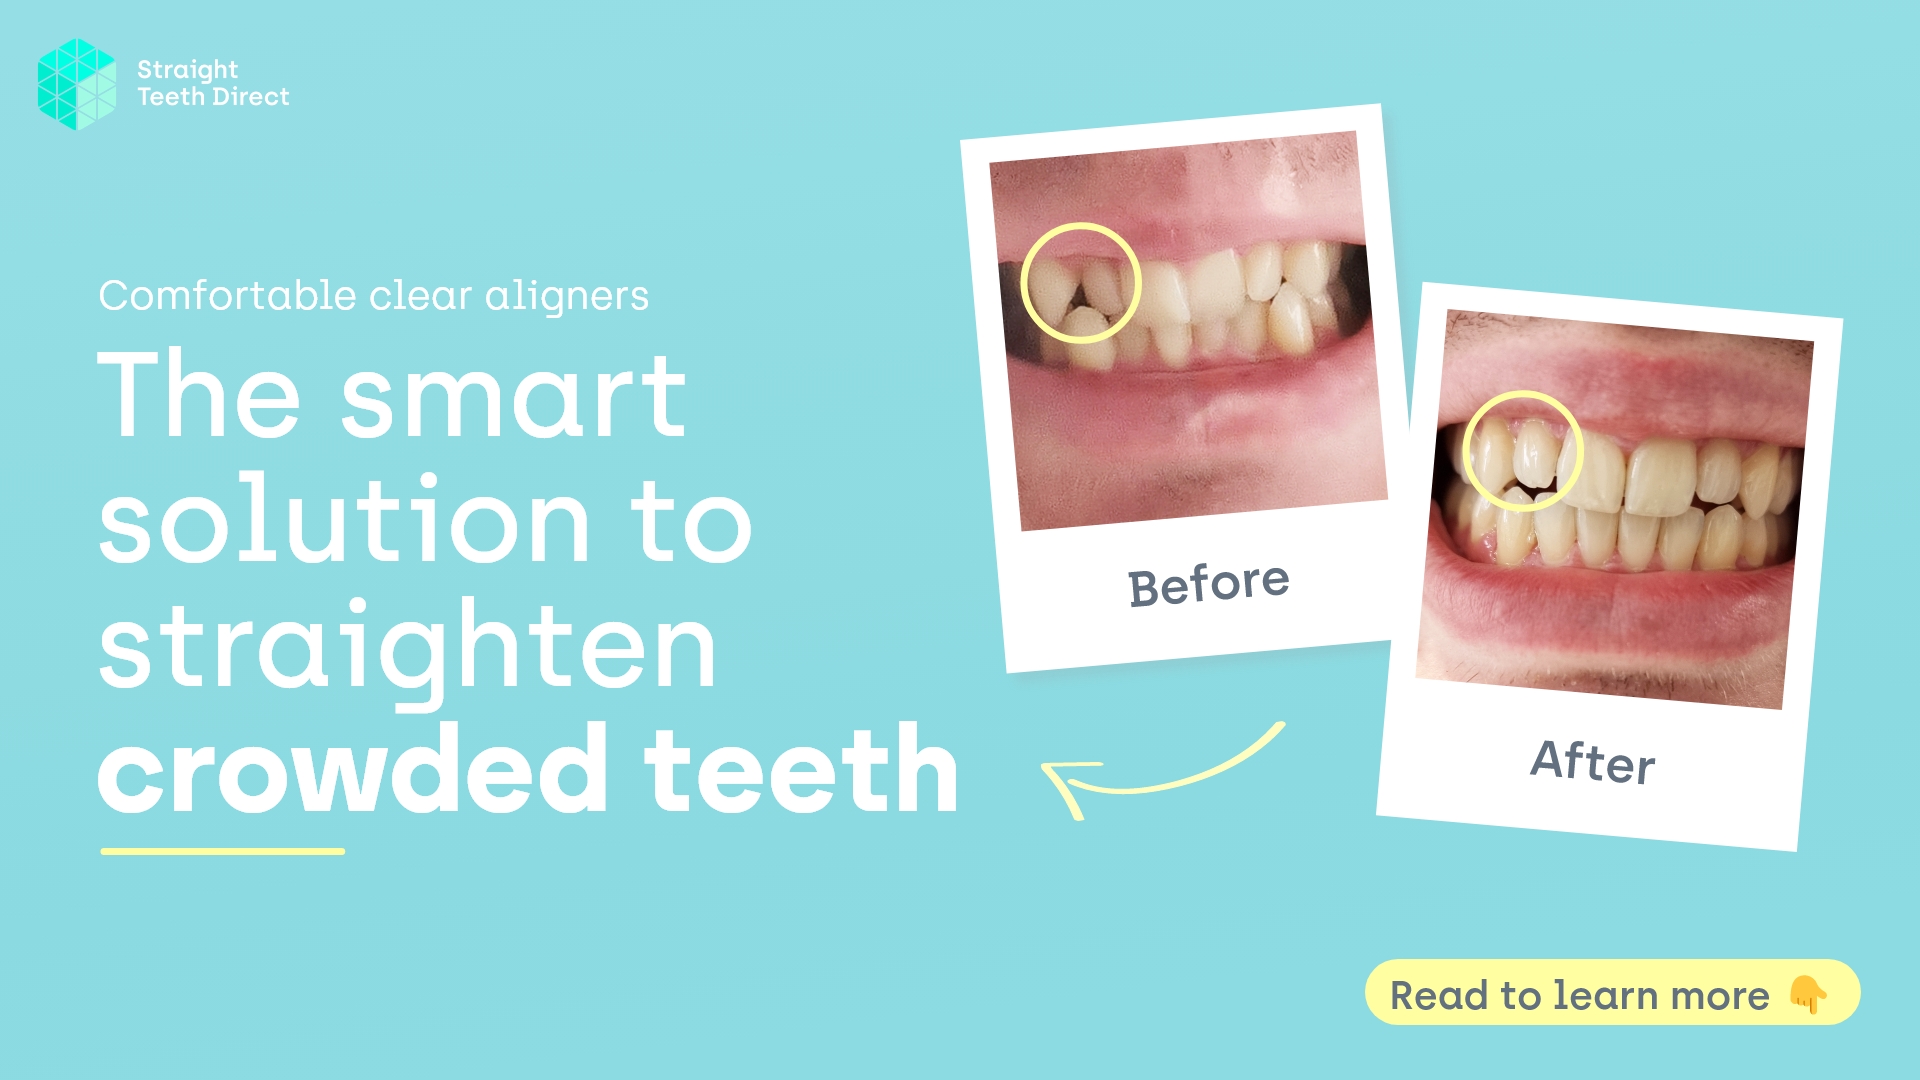 The smart solution to straighten crowded teeth blog